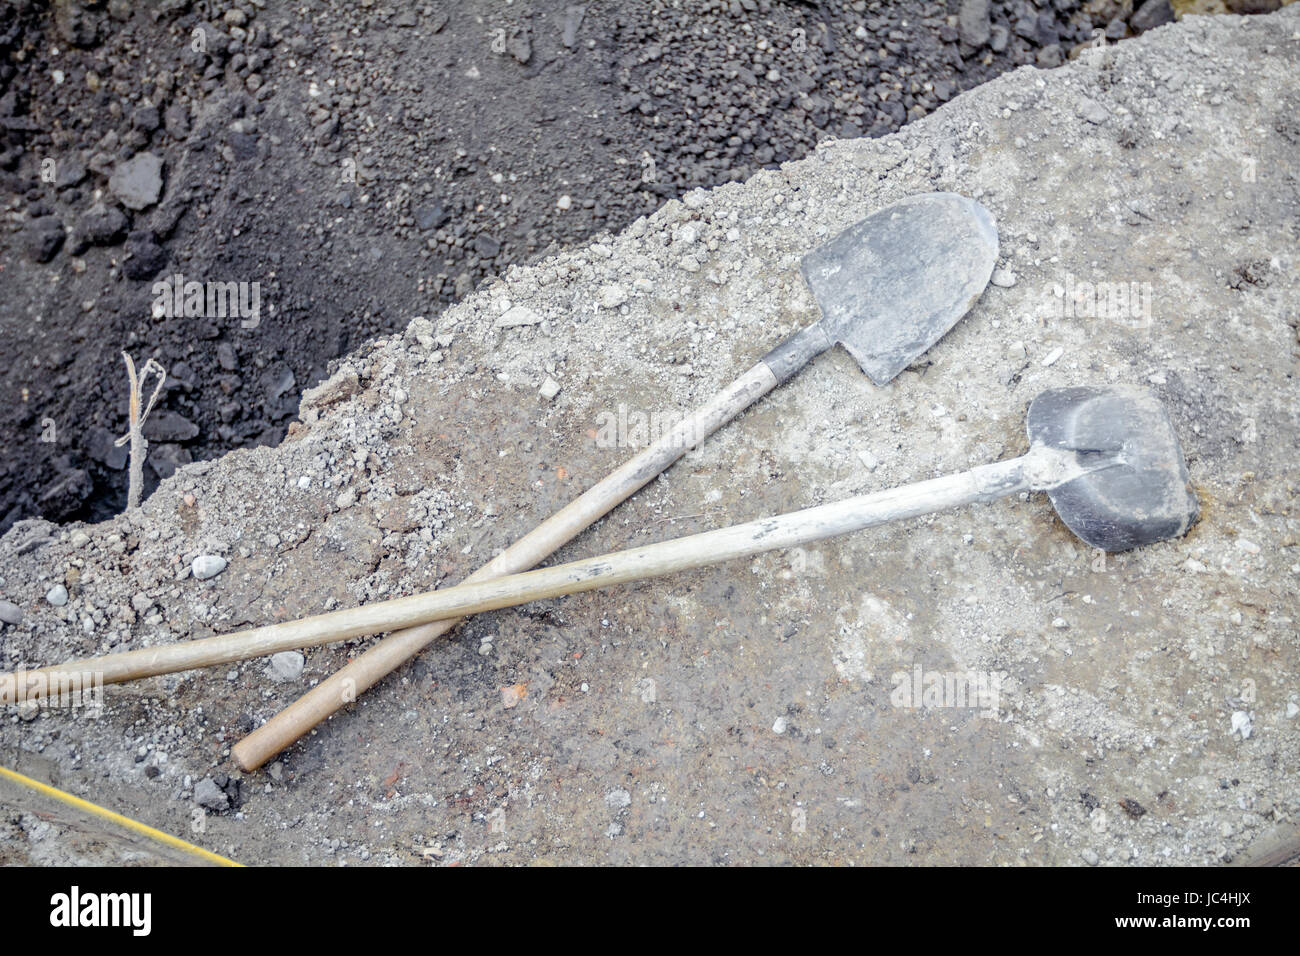 View on tools for manually ground work, spade and shovel crossed ...